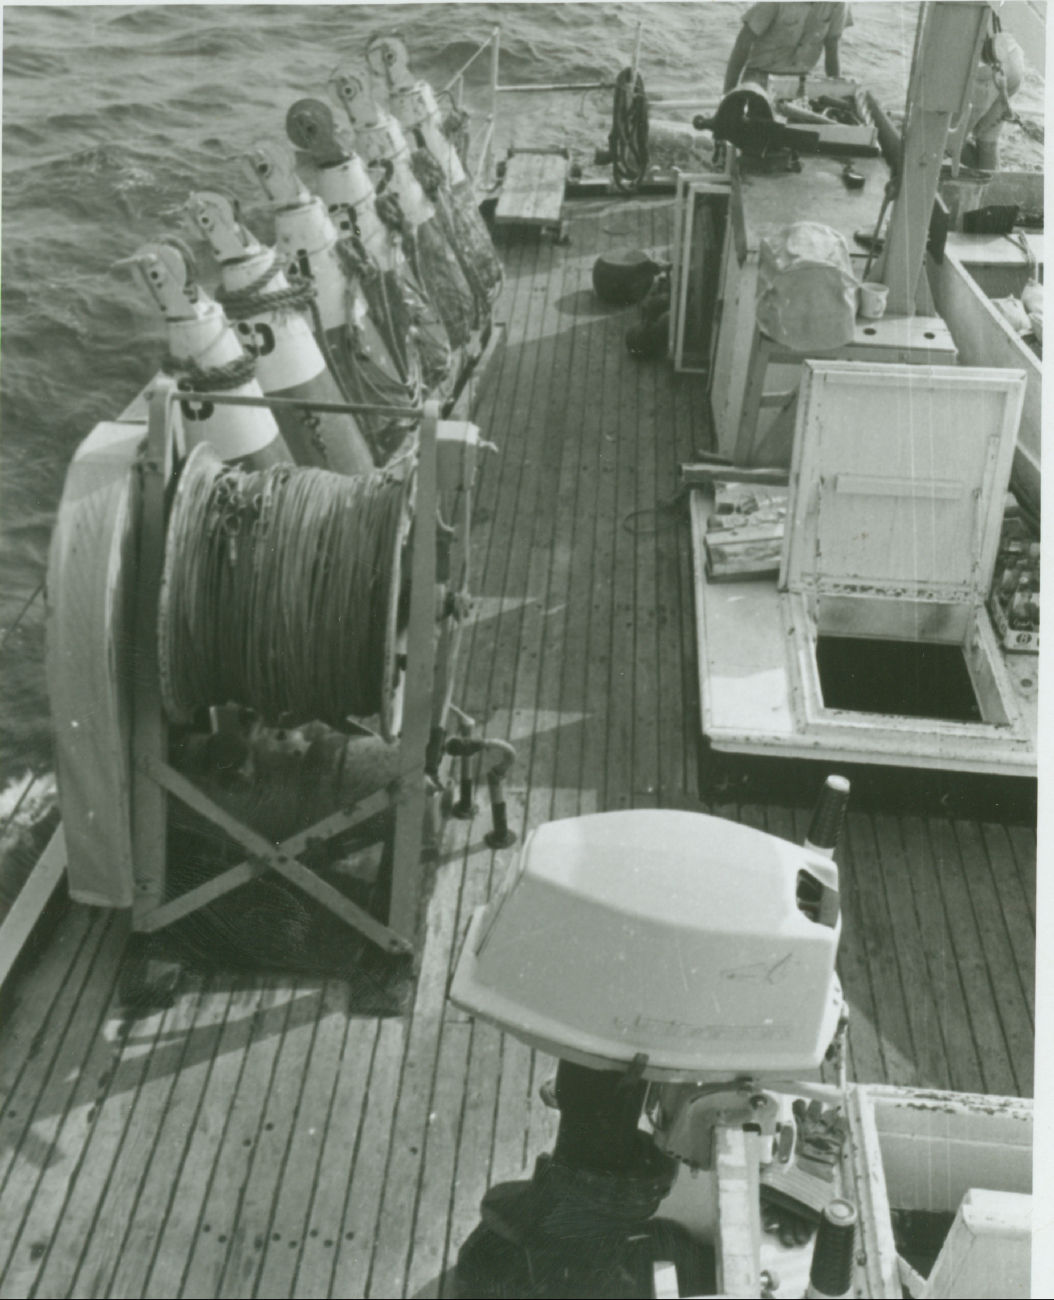 After deck of either HILGARD or WAINWRIGHT rigged for wiredrag operations